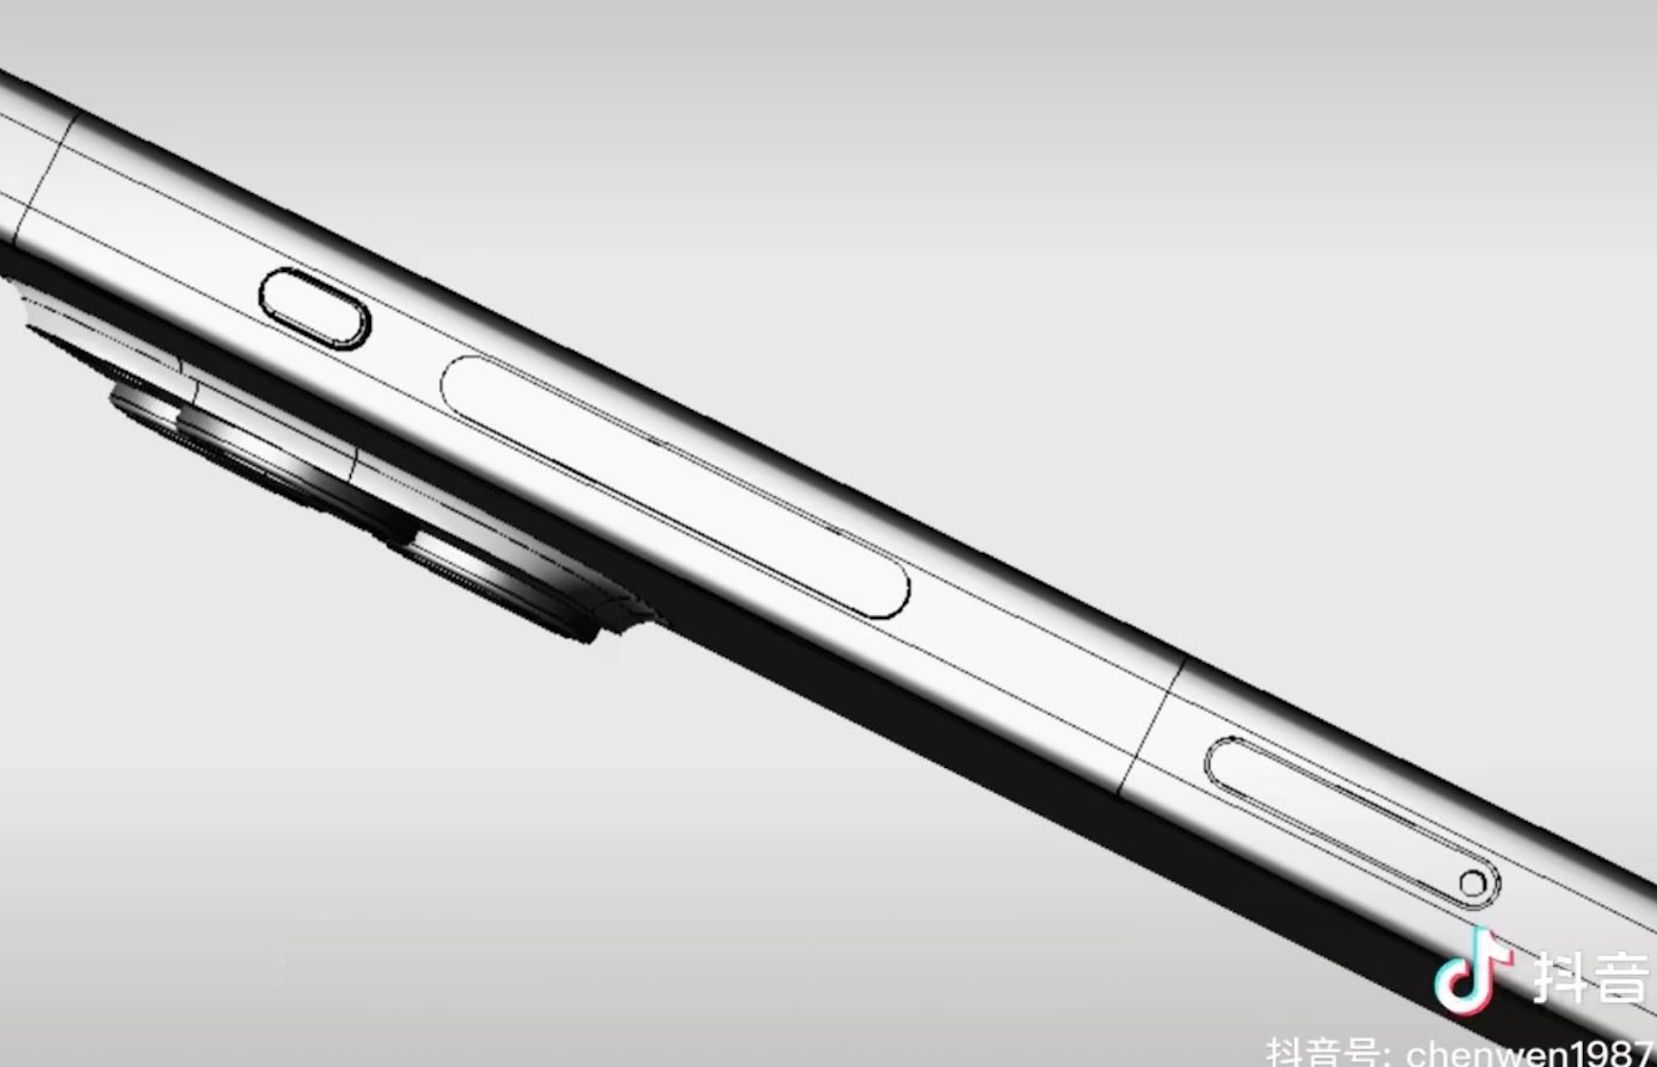 iPhone 15 Pro CAD leak shows a single volume button, no more mute switch